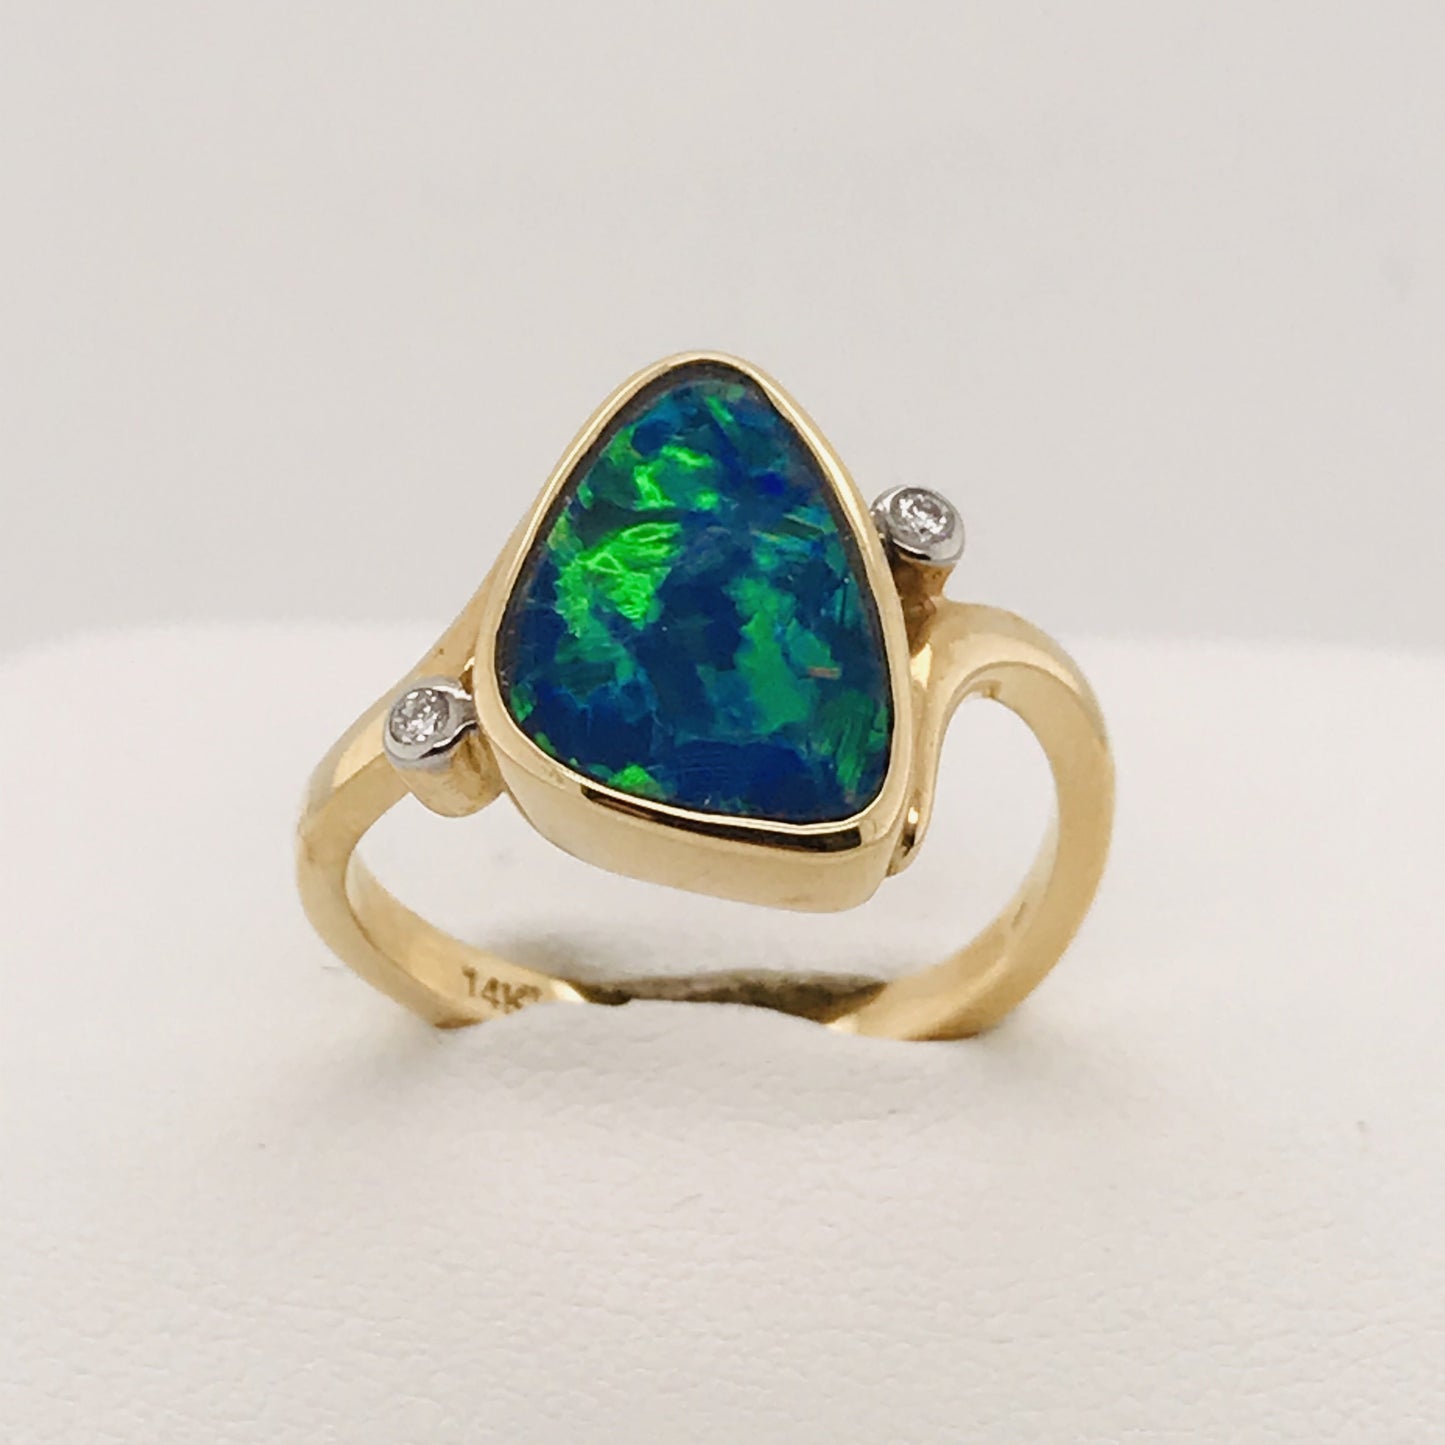 14K YG DOUBLET OPAL AND DIAMOND RING